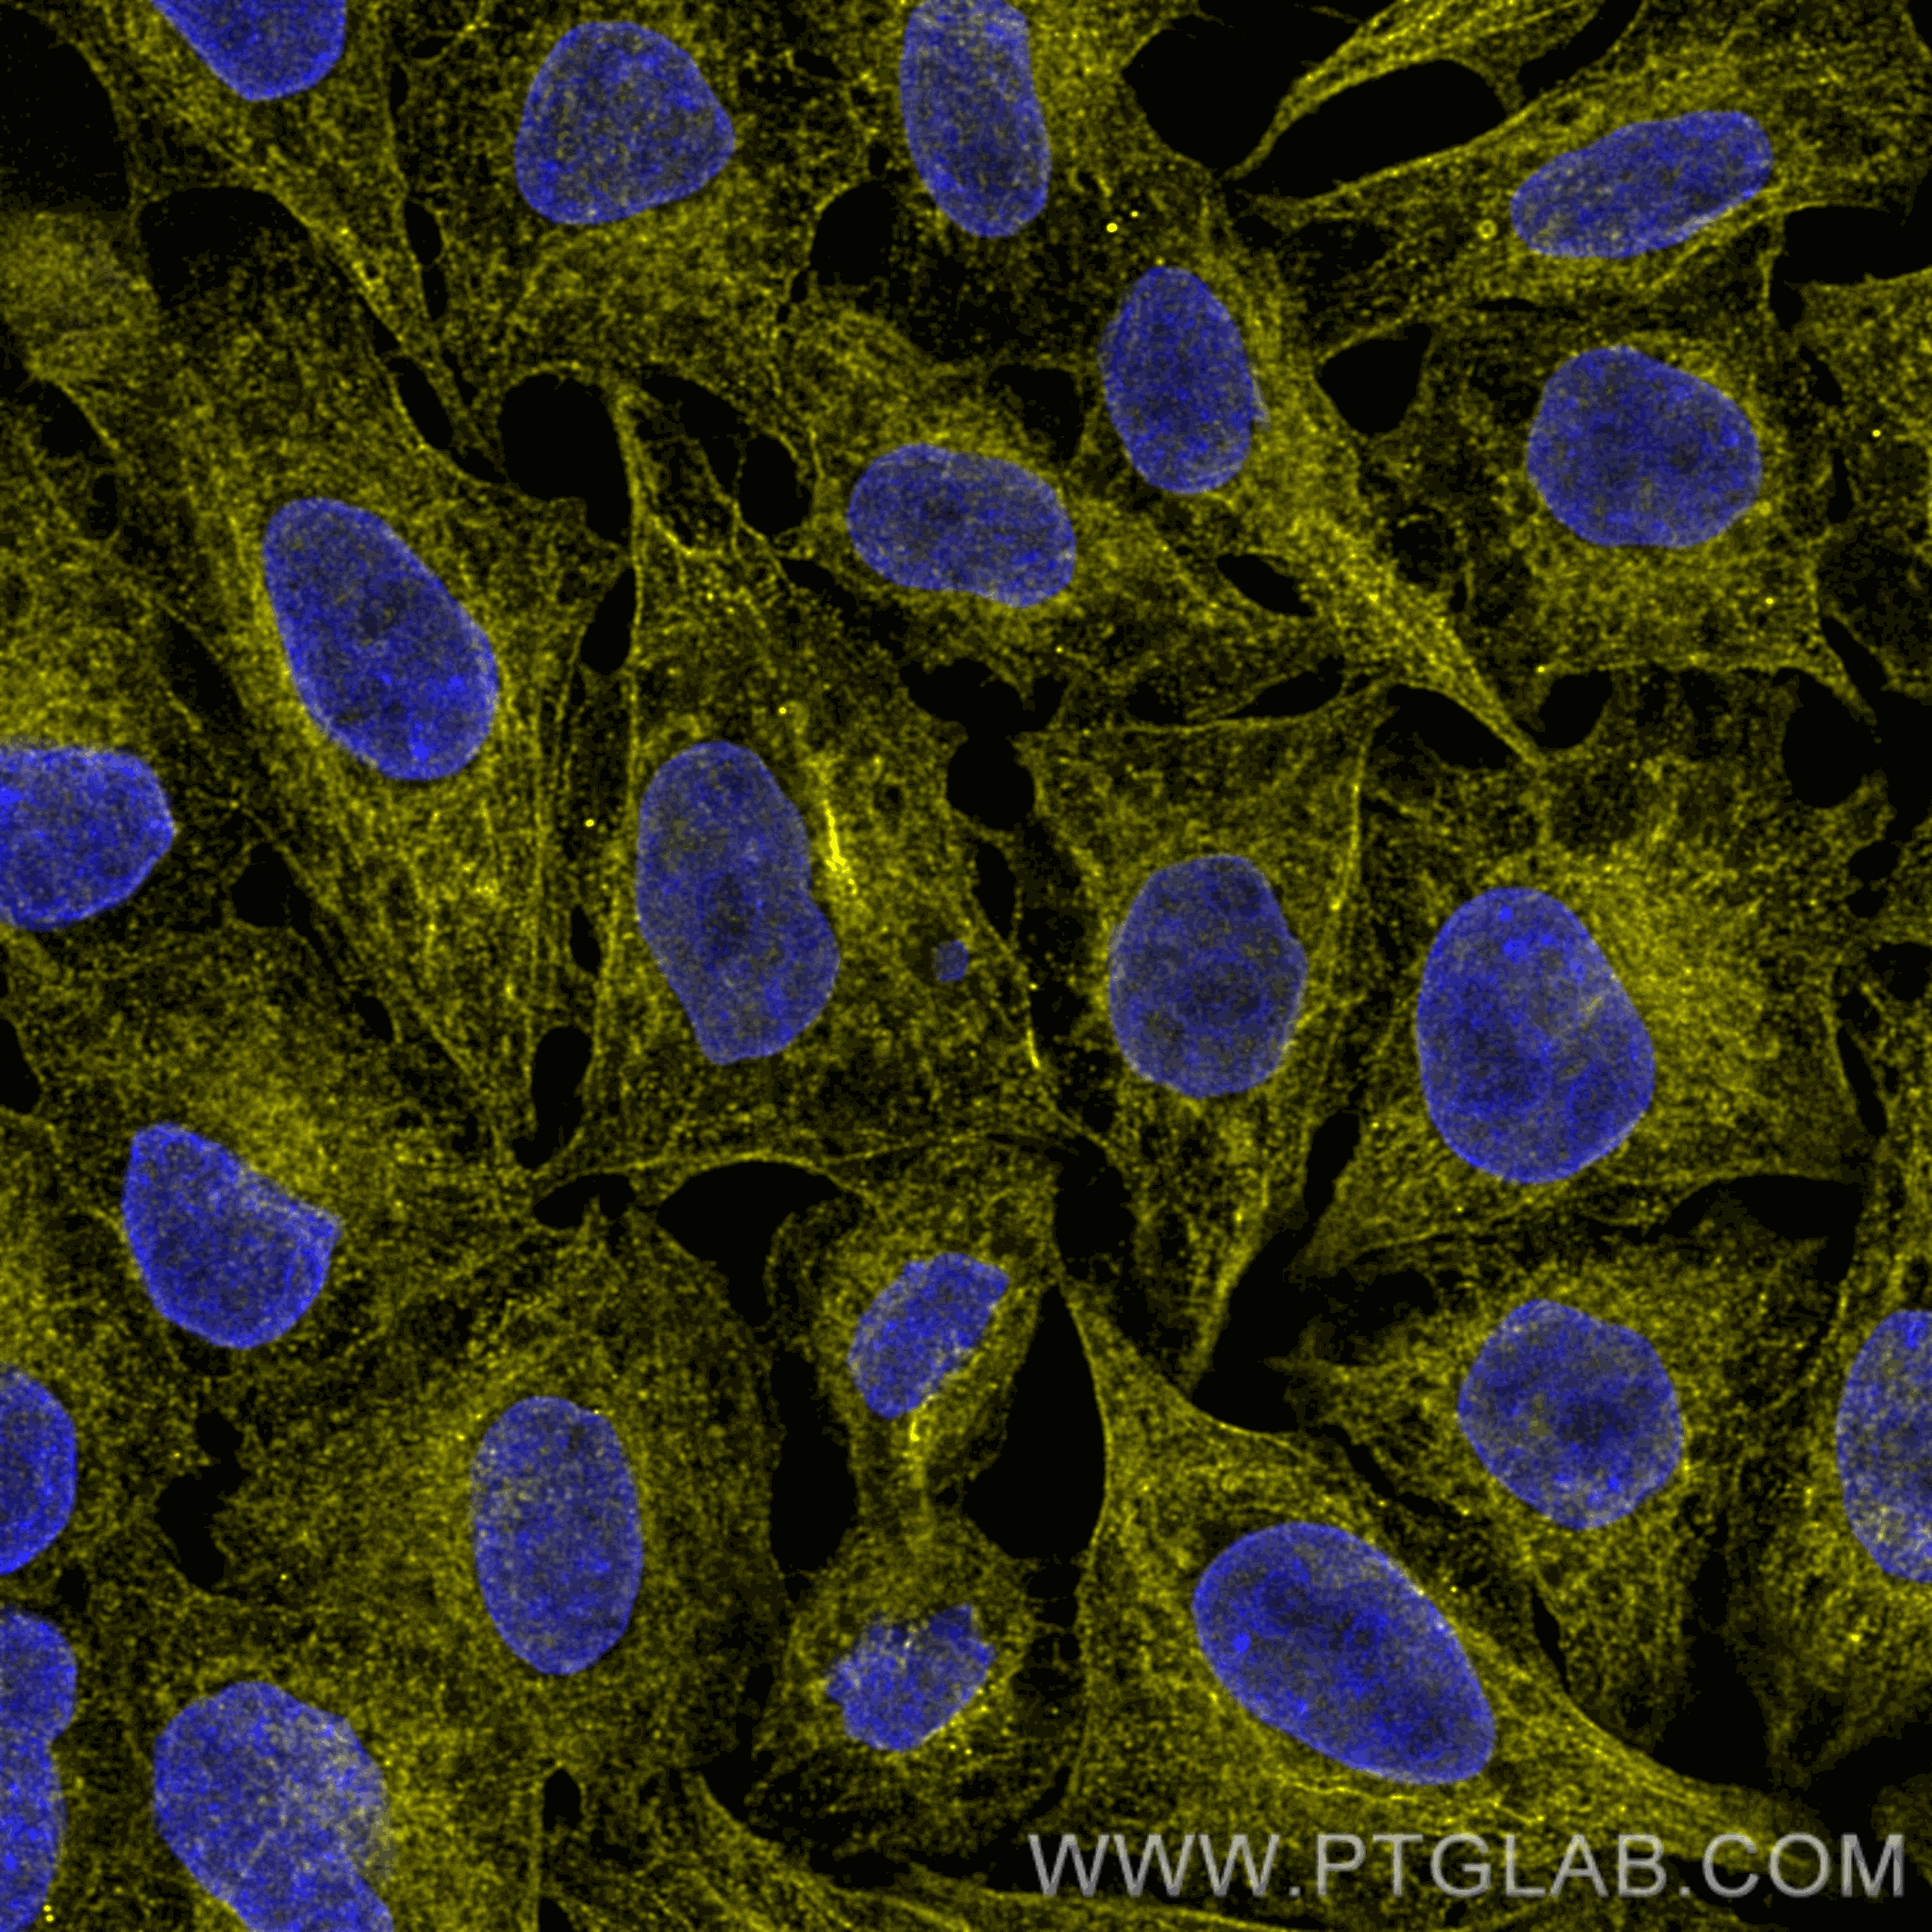 Immunofluorescence of HeLa: PFA-fixed HeLa cells were stained with anti-Tubulin β antibody labeled with FlexAble Biotin Antibody Labeling Kit for Mouse IgG2b (KFA067) and Streptavidin-ATTO594​ (yellow). Nuclei are stained with DAPI (blue). Confocal images were acquired with a 100x oil objective and post-processed. Images were recorded at the Core Facility Bioimaging at the Biomedical Center, LMU Munich.